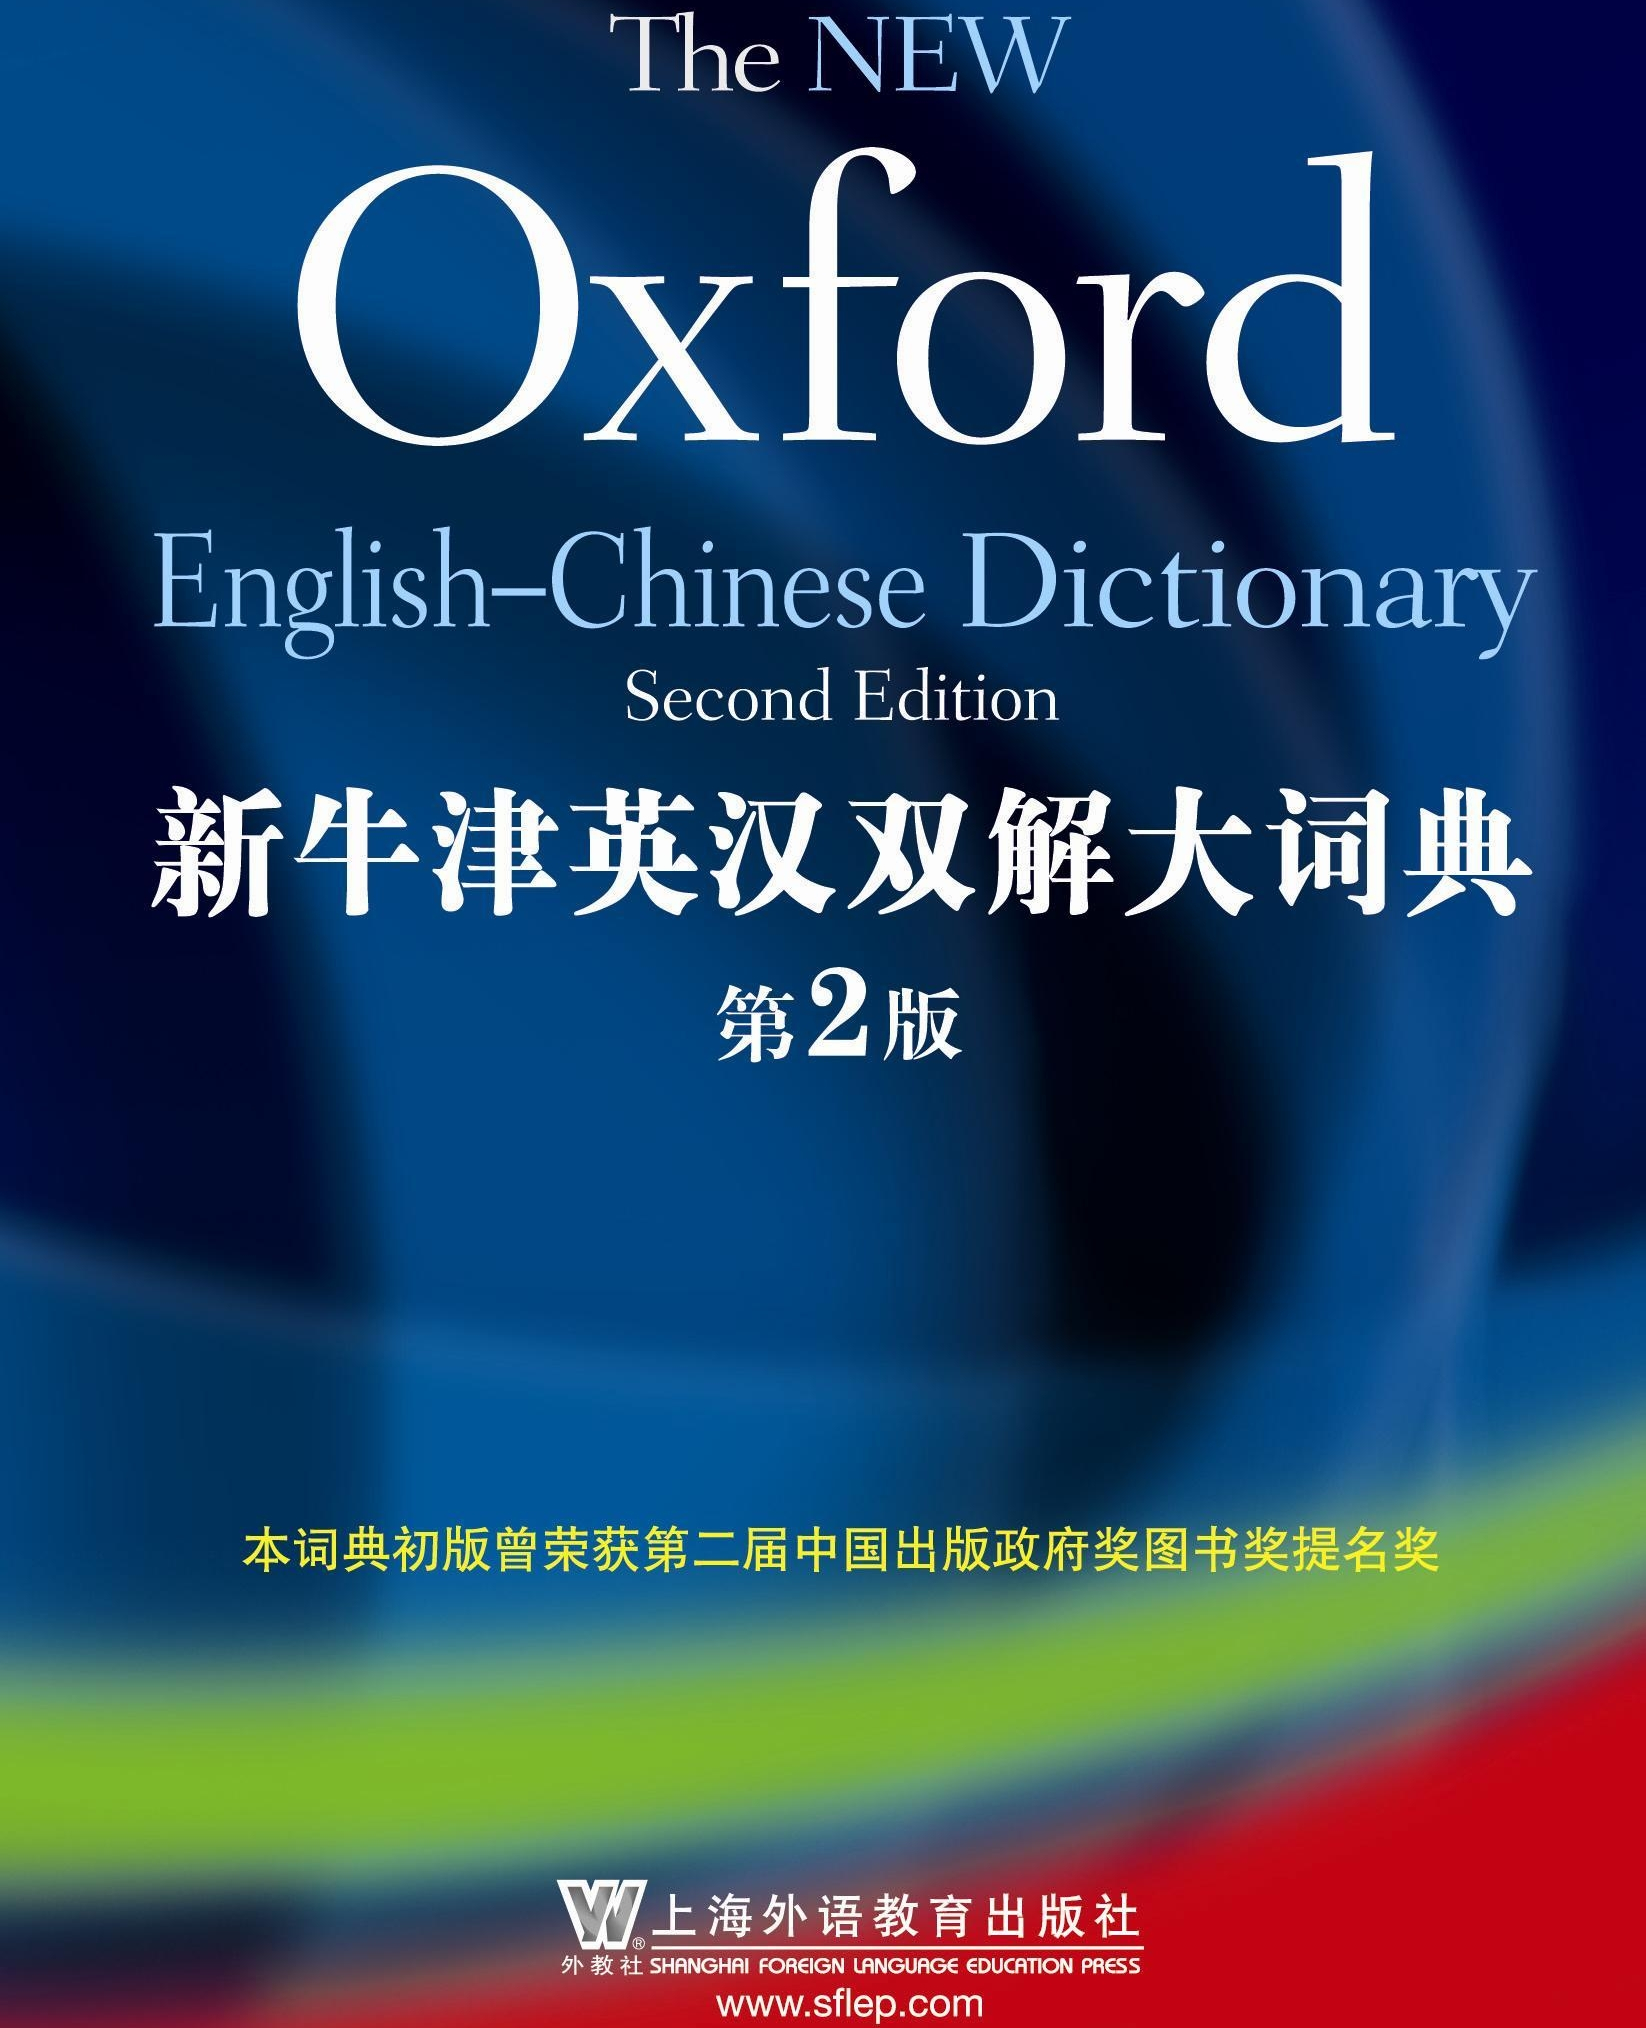 Index of /尚未整理/集合/Oxford Dictionaries/The New Oxford English 